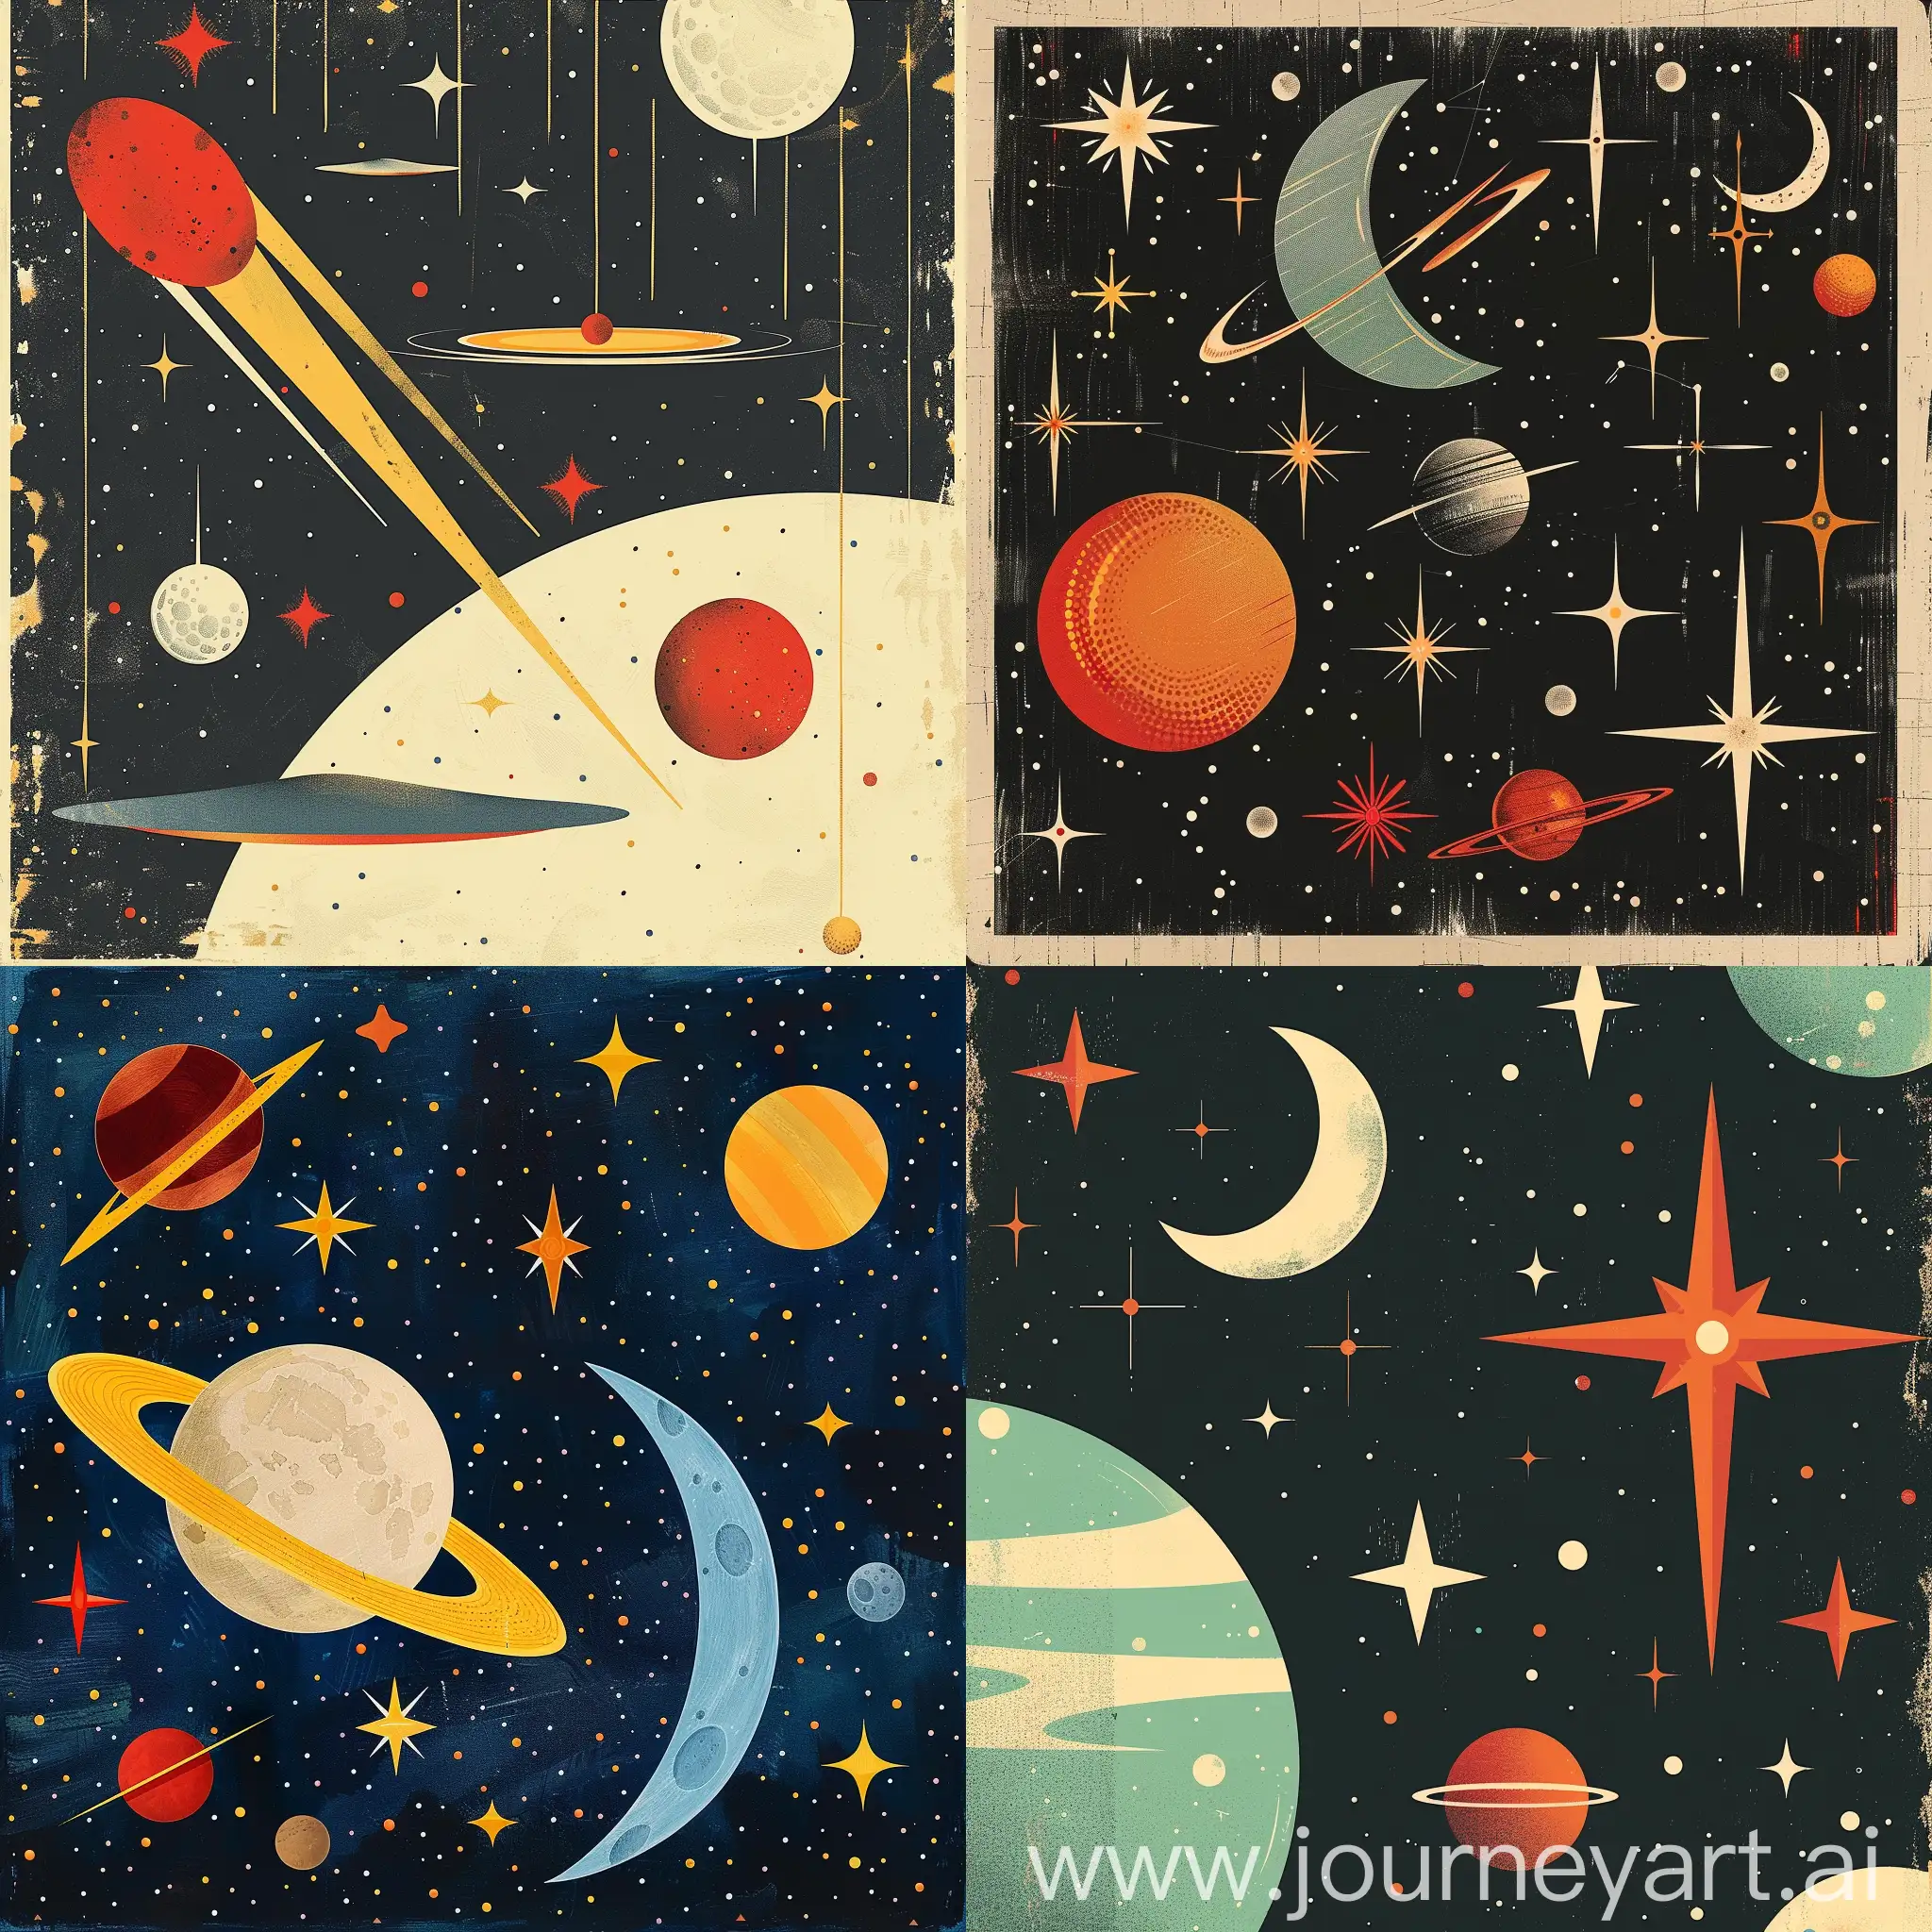 Midcentury-Modern-Space-Illustration-with-Moon-Stars-and-Planets